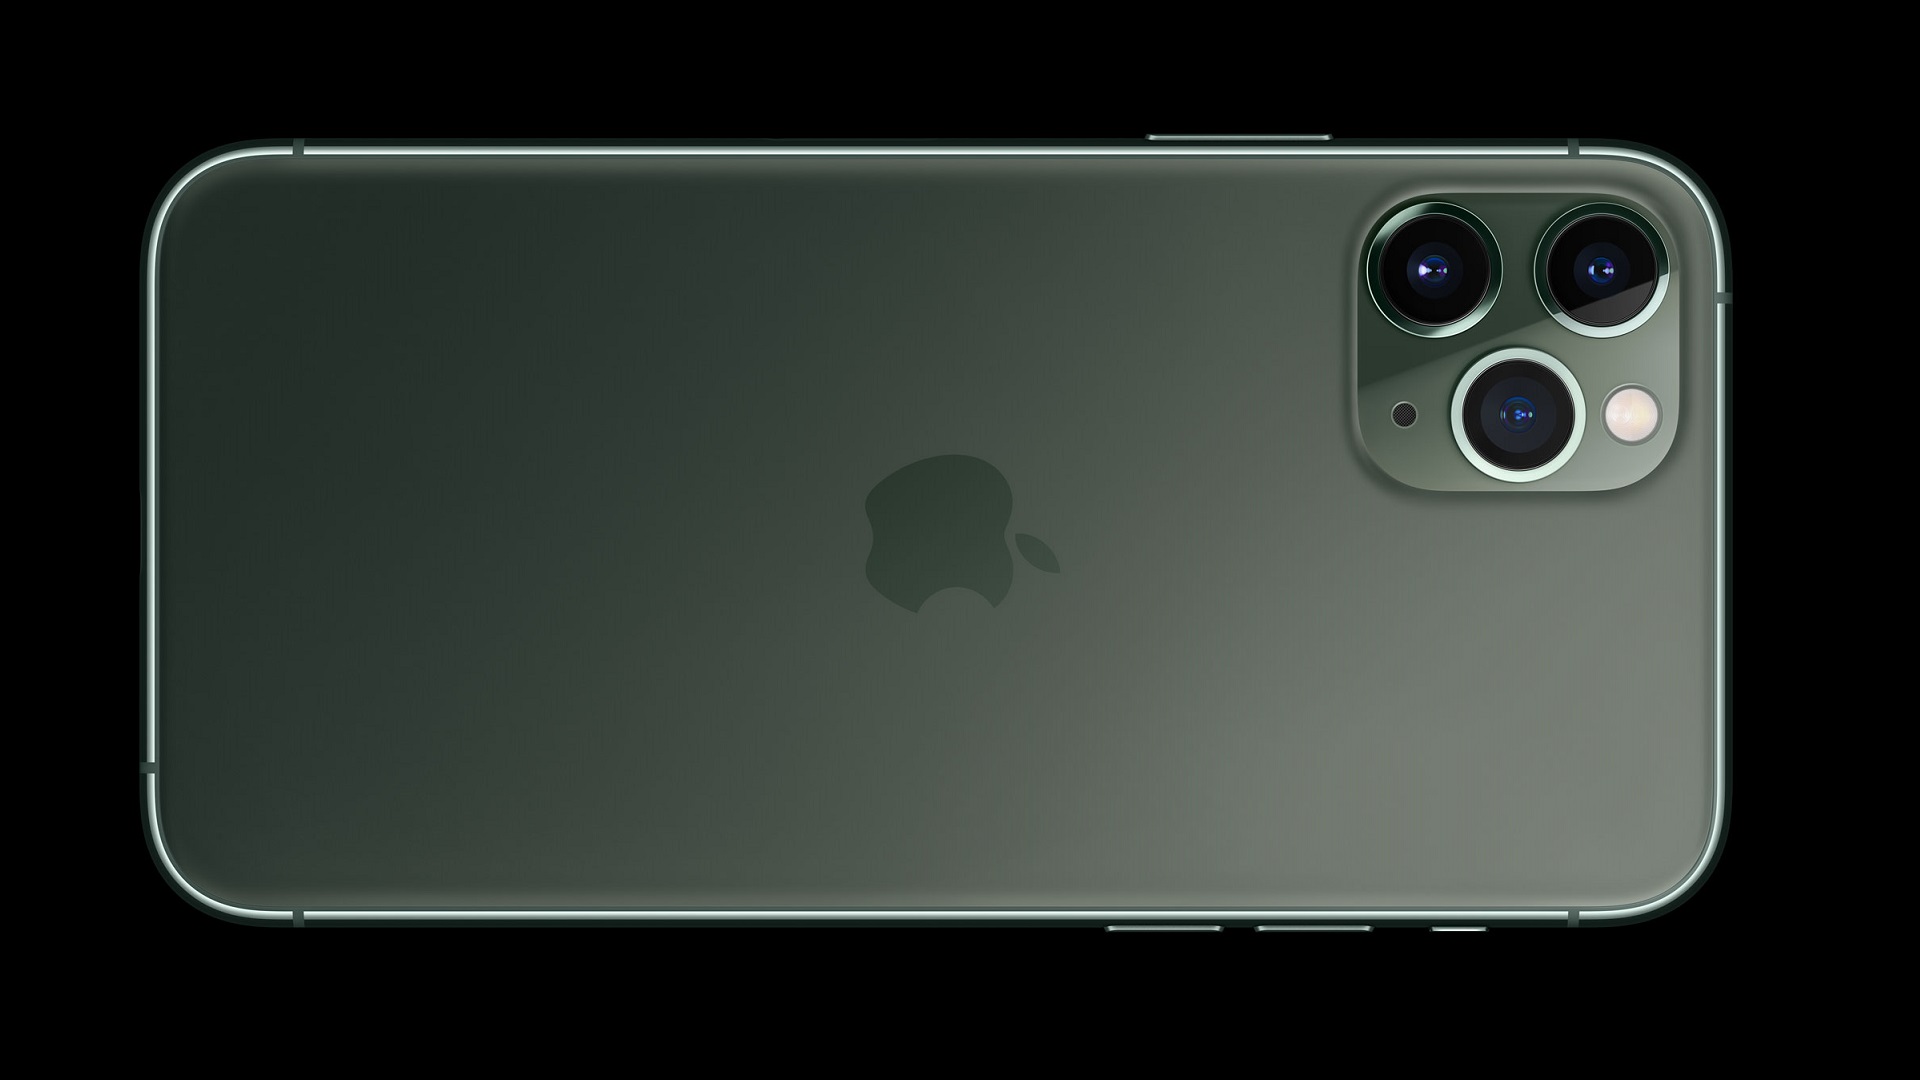 Apple iPhone 11 Pro Announced - Featuring Four Cameras, All ...